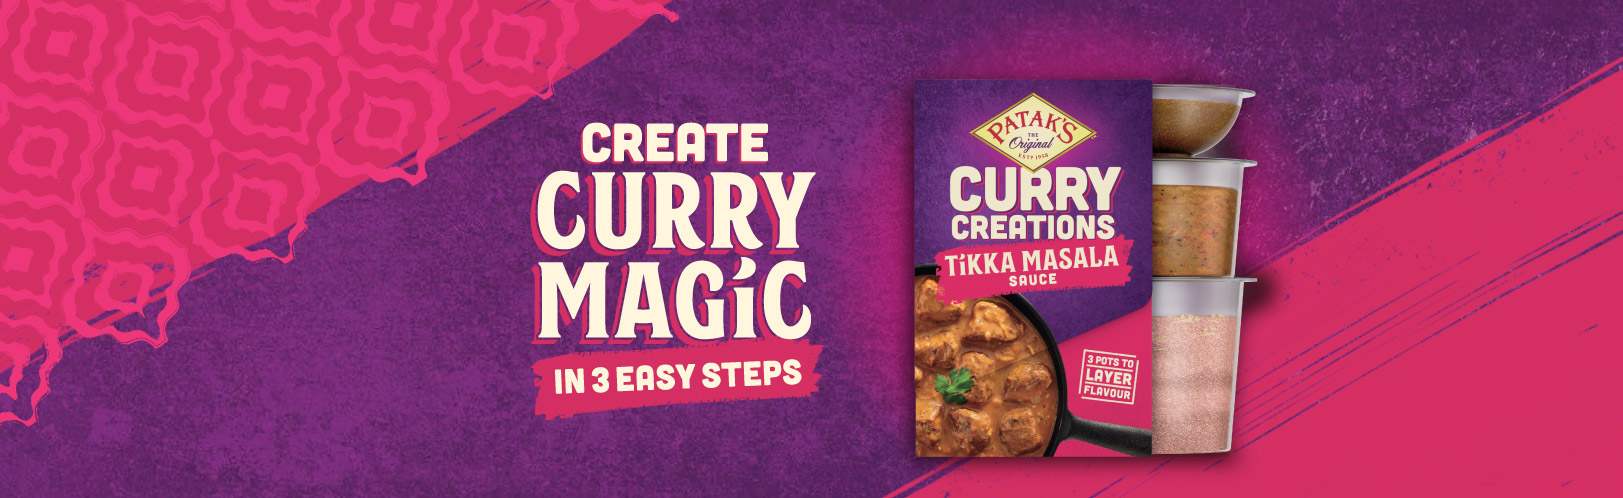 curry-creations banner image